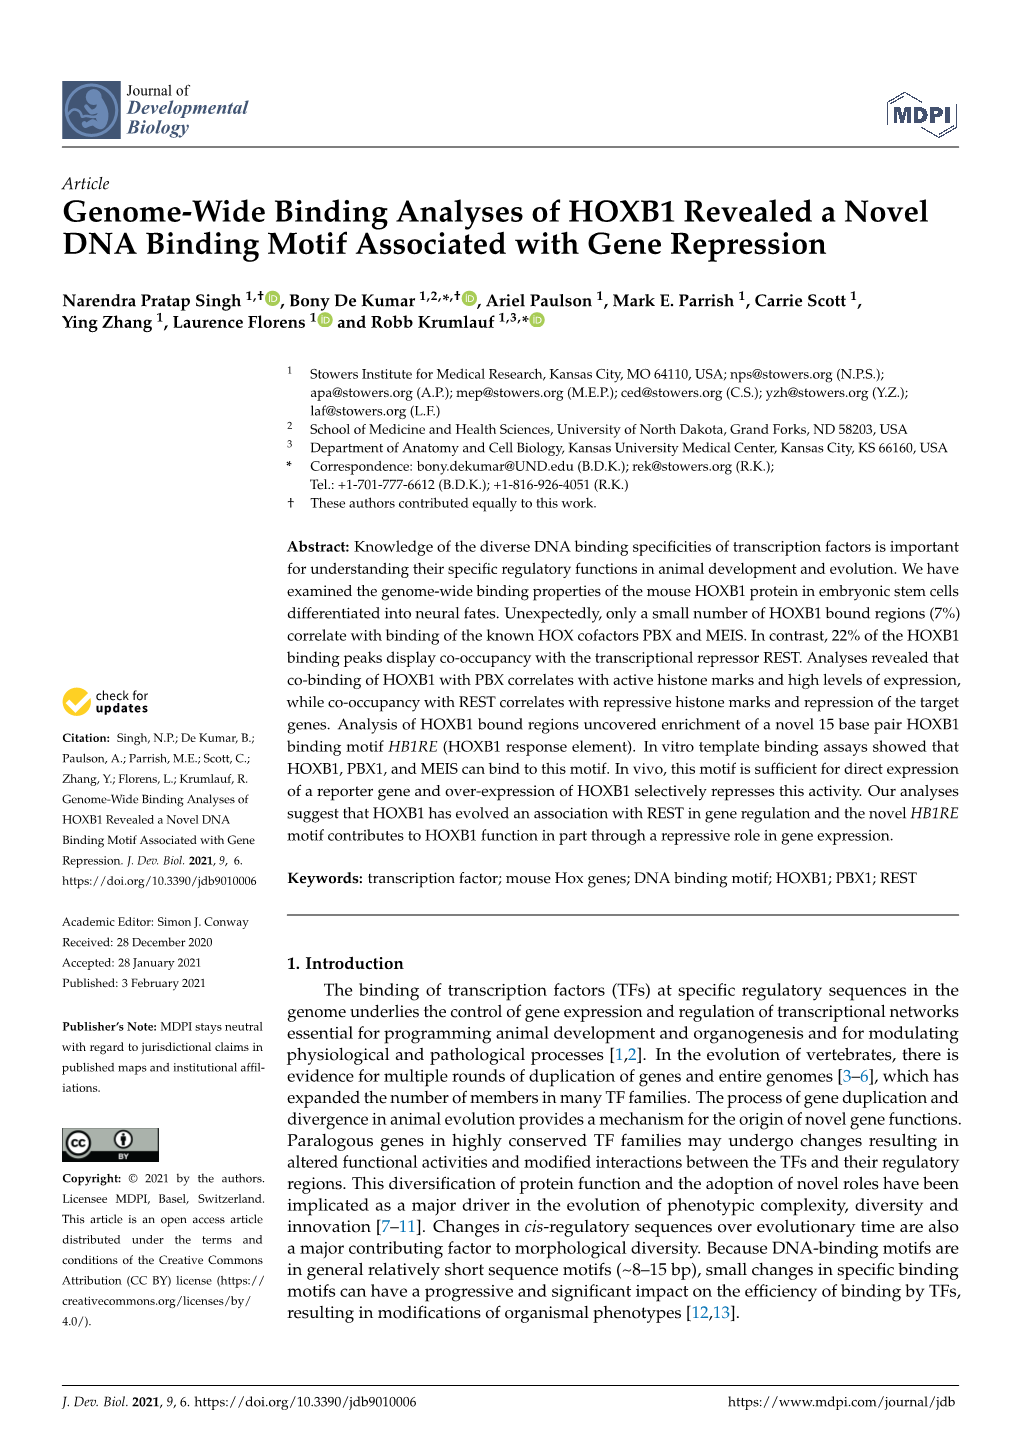 Genome-Wide Binding Analyses of HOXB1 Revealed a Novel DNA Binding Motif Associated with Gene Repression